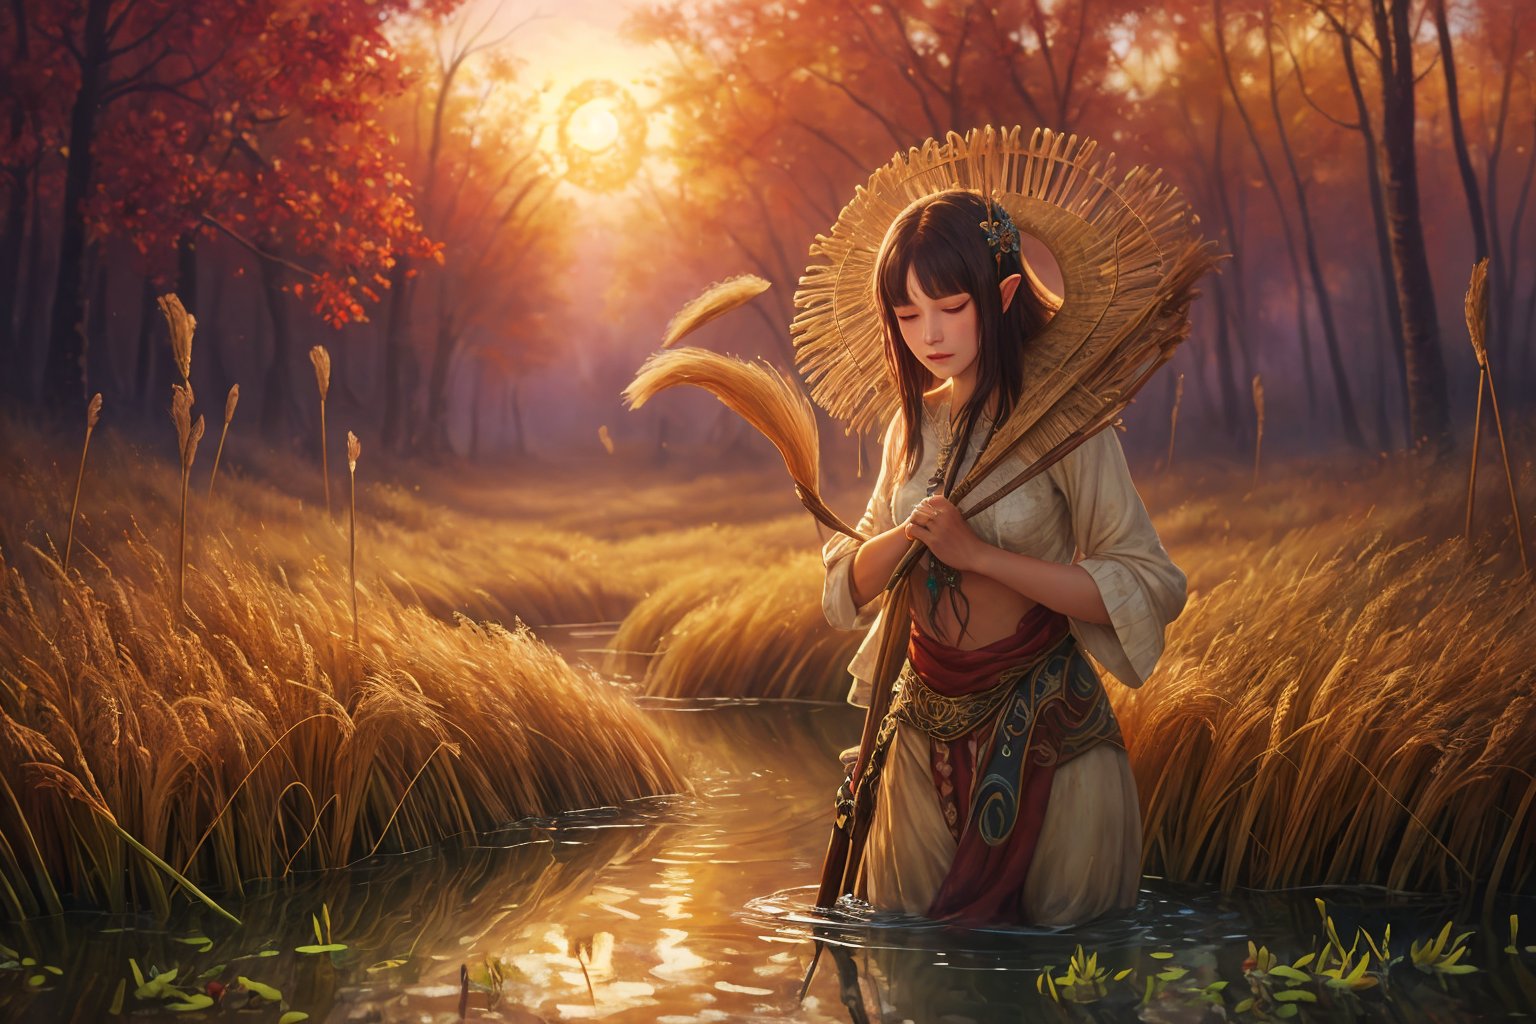 (masterpiece)(bestquality)Whispering Reeds, The reeds sway in an otherworldly breeze, murmuring secrets that were never meant to be heard by mortal ears, as unseen eyes watch from the depths of the stagnant waters.(4k, oil painting , highly detailed)